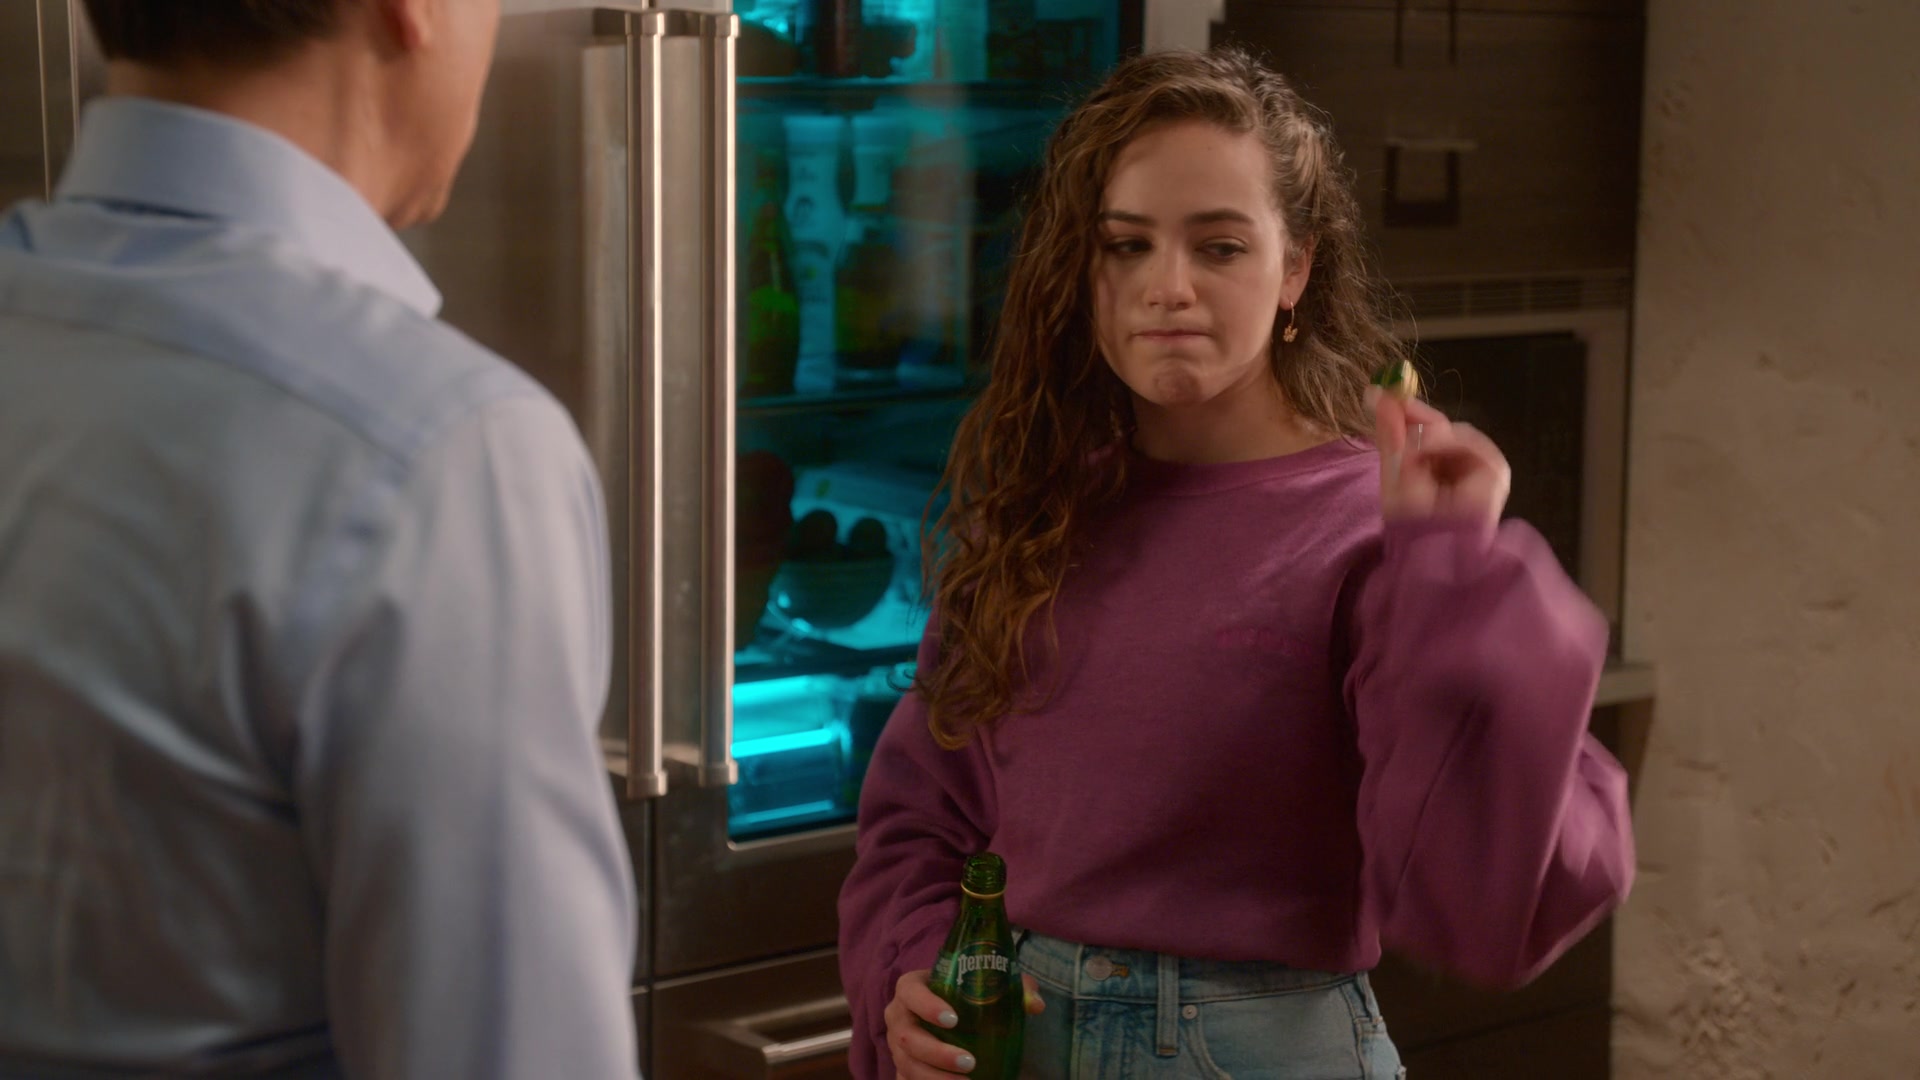 Perrier Water Bottle Of Mary Mouser As Samantha Larusso In Cobra Kai S04e05 Match Point 2021